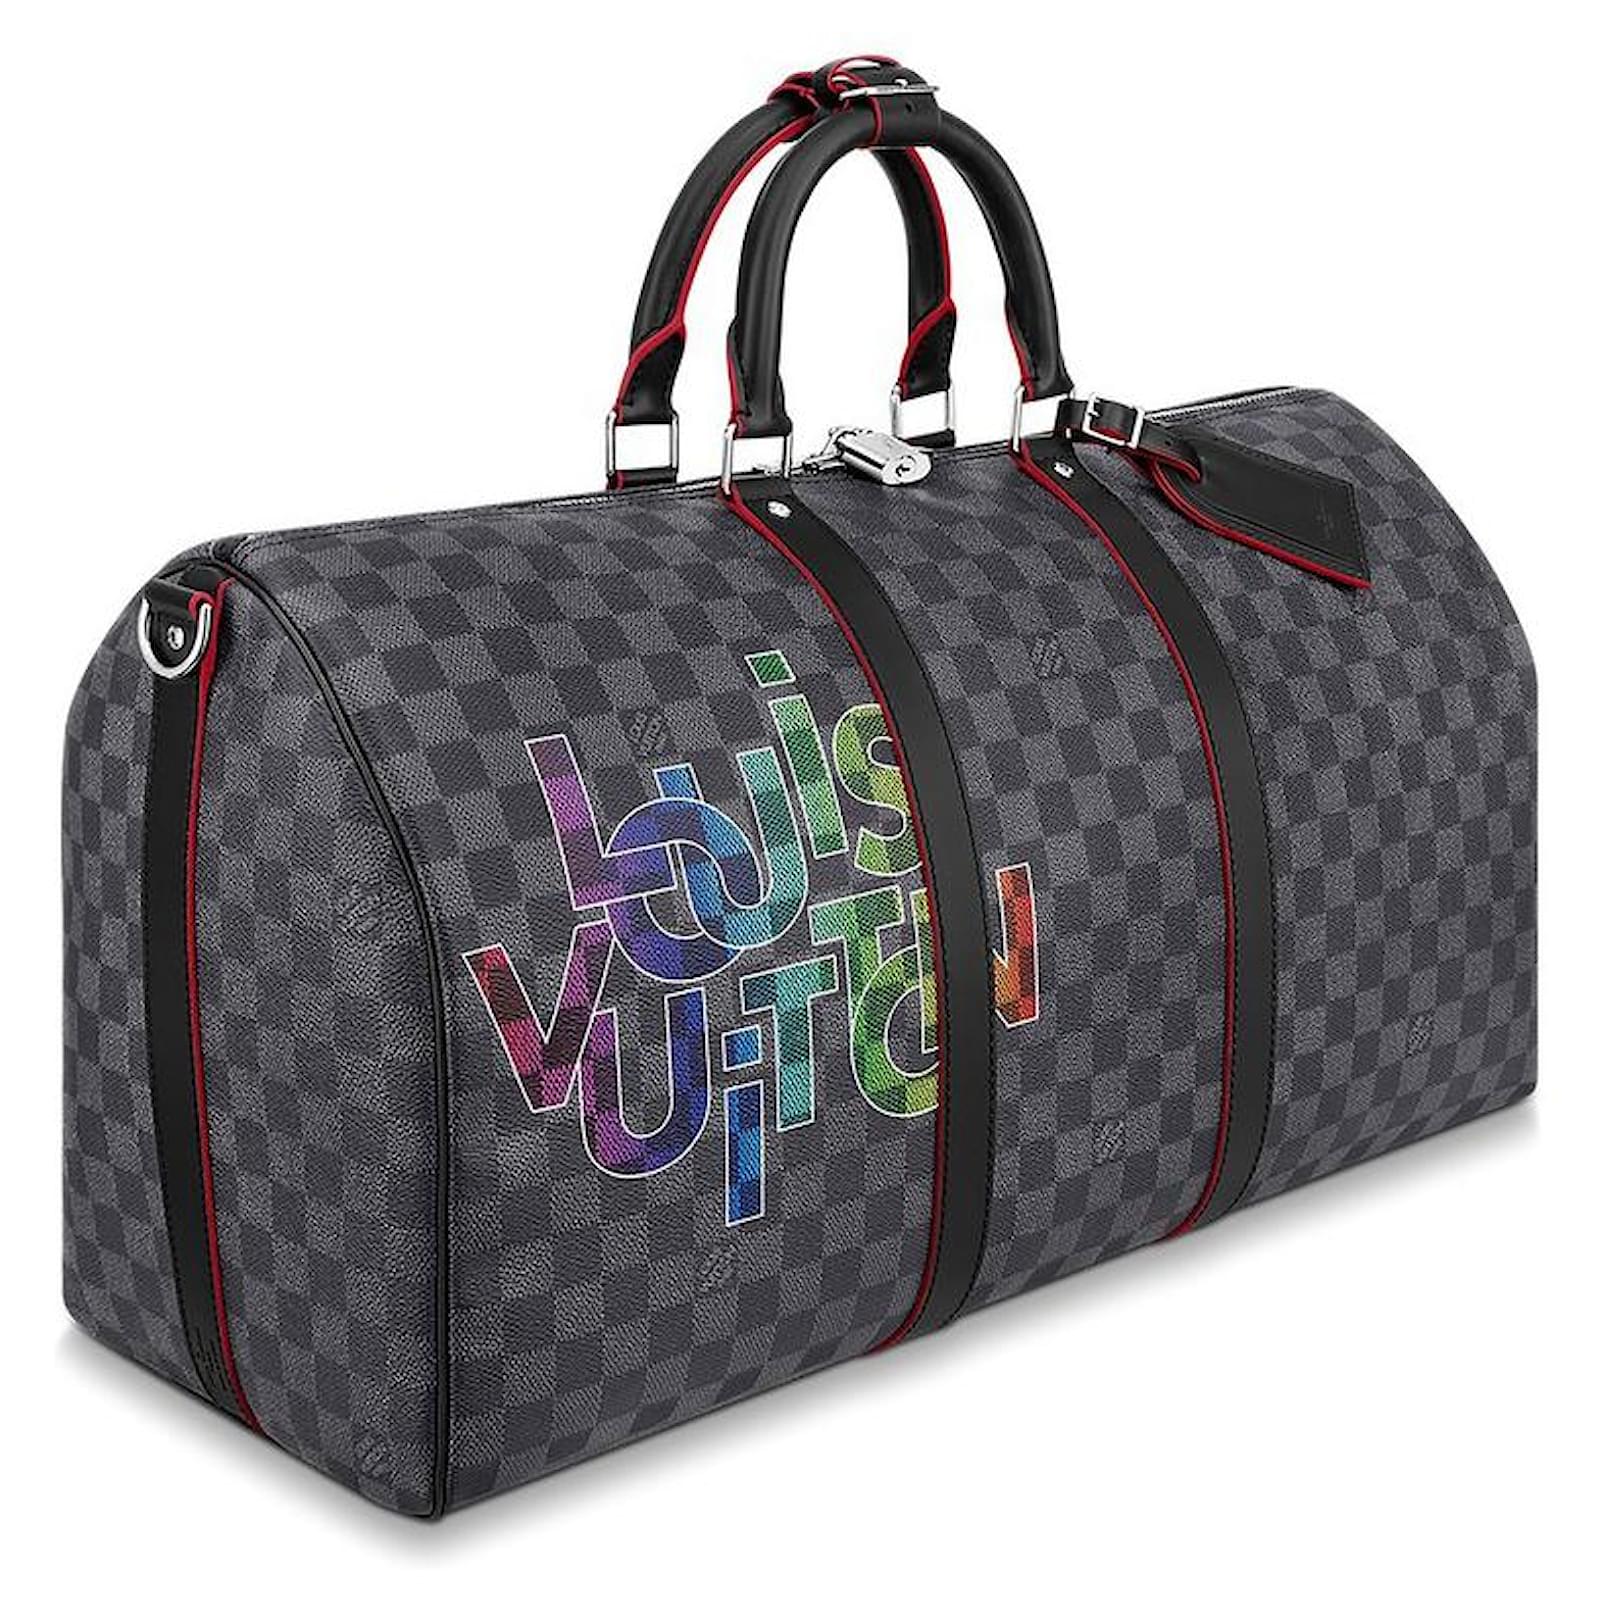 BRAND NEW-Limited edition Louis Vuitton keepall 50 Friends